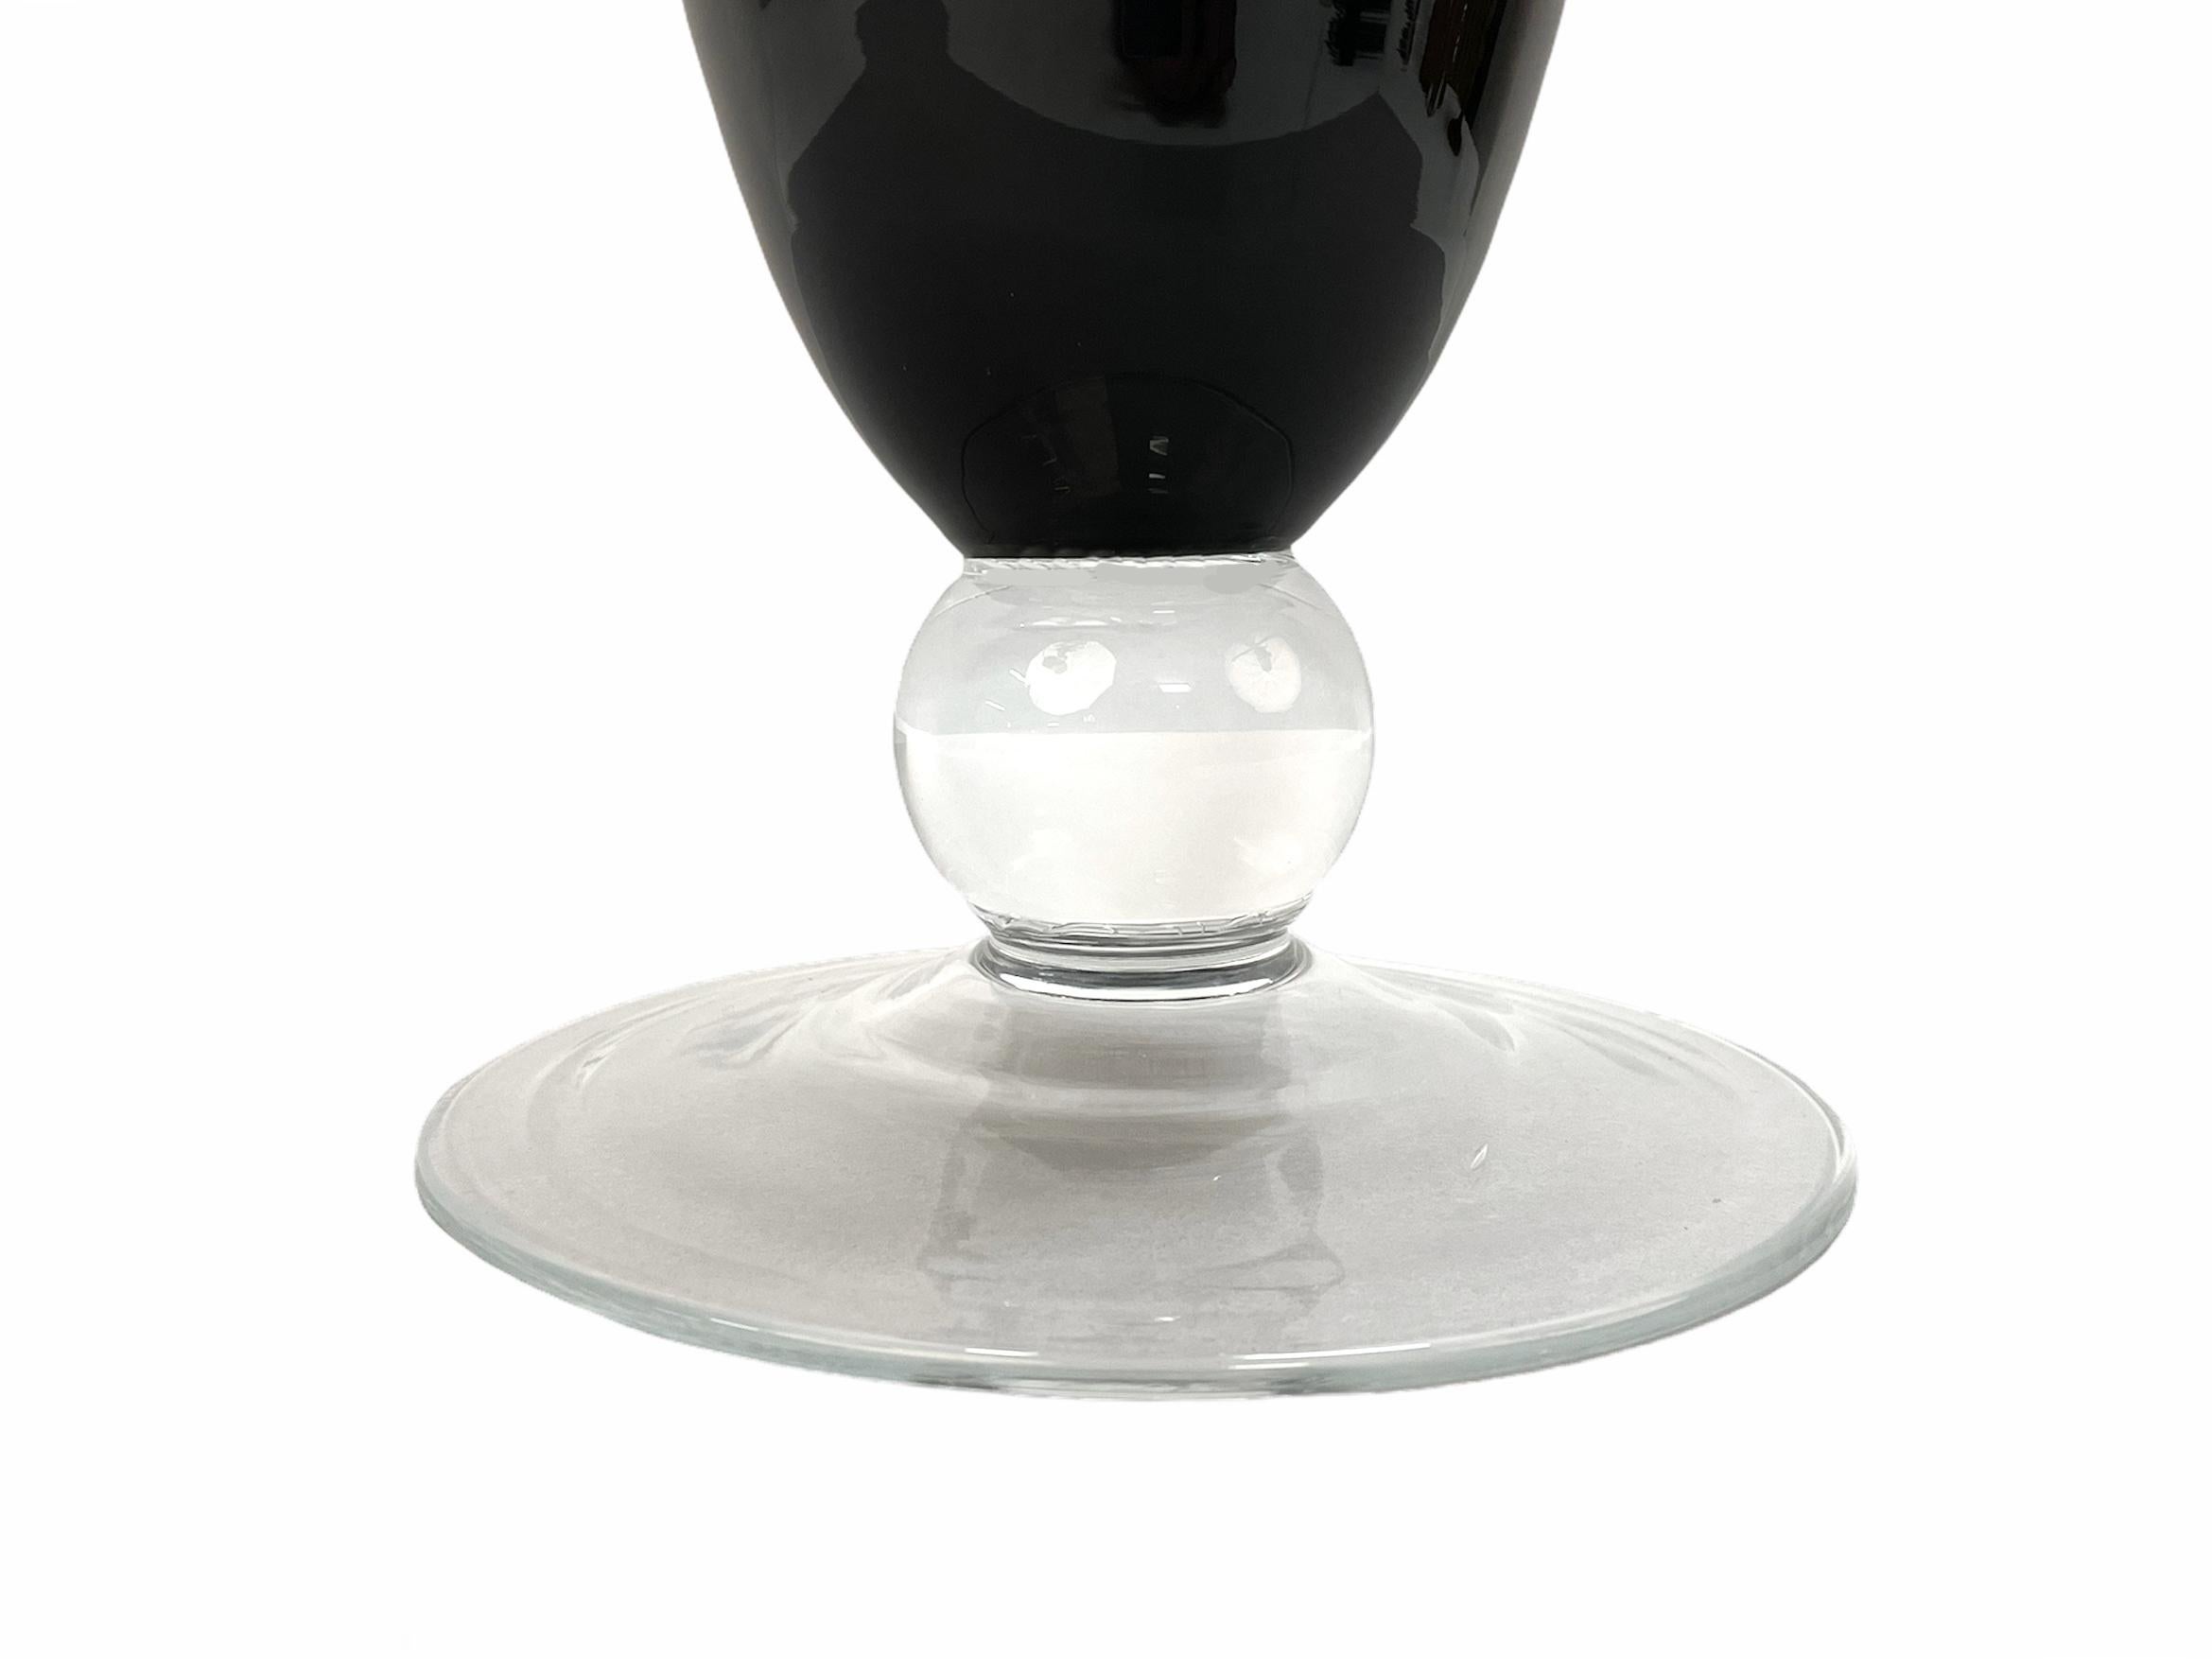 Midcentury Large Italian Black Glass Artistic Vase with Crystal Base, 1980s For Sale 3